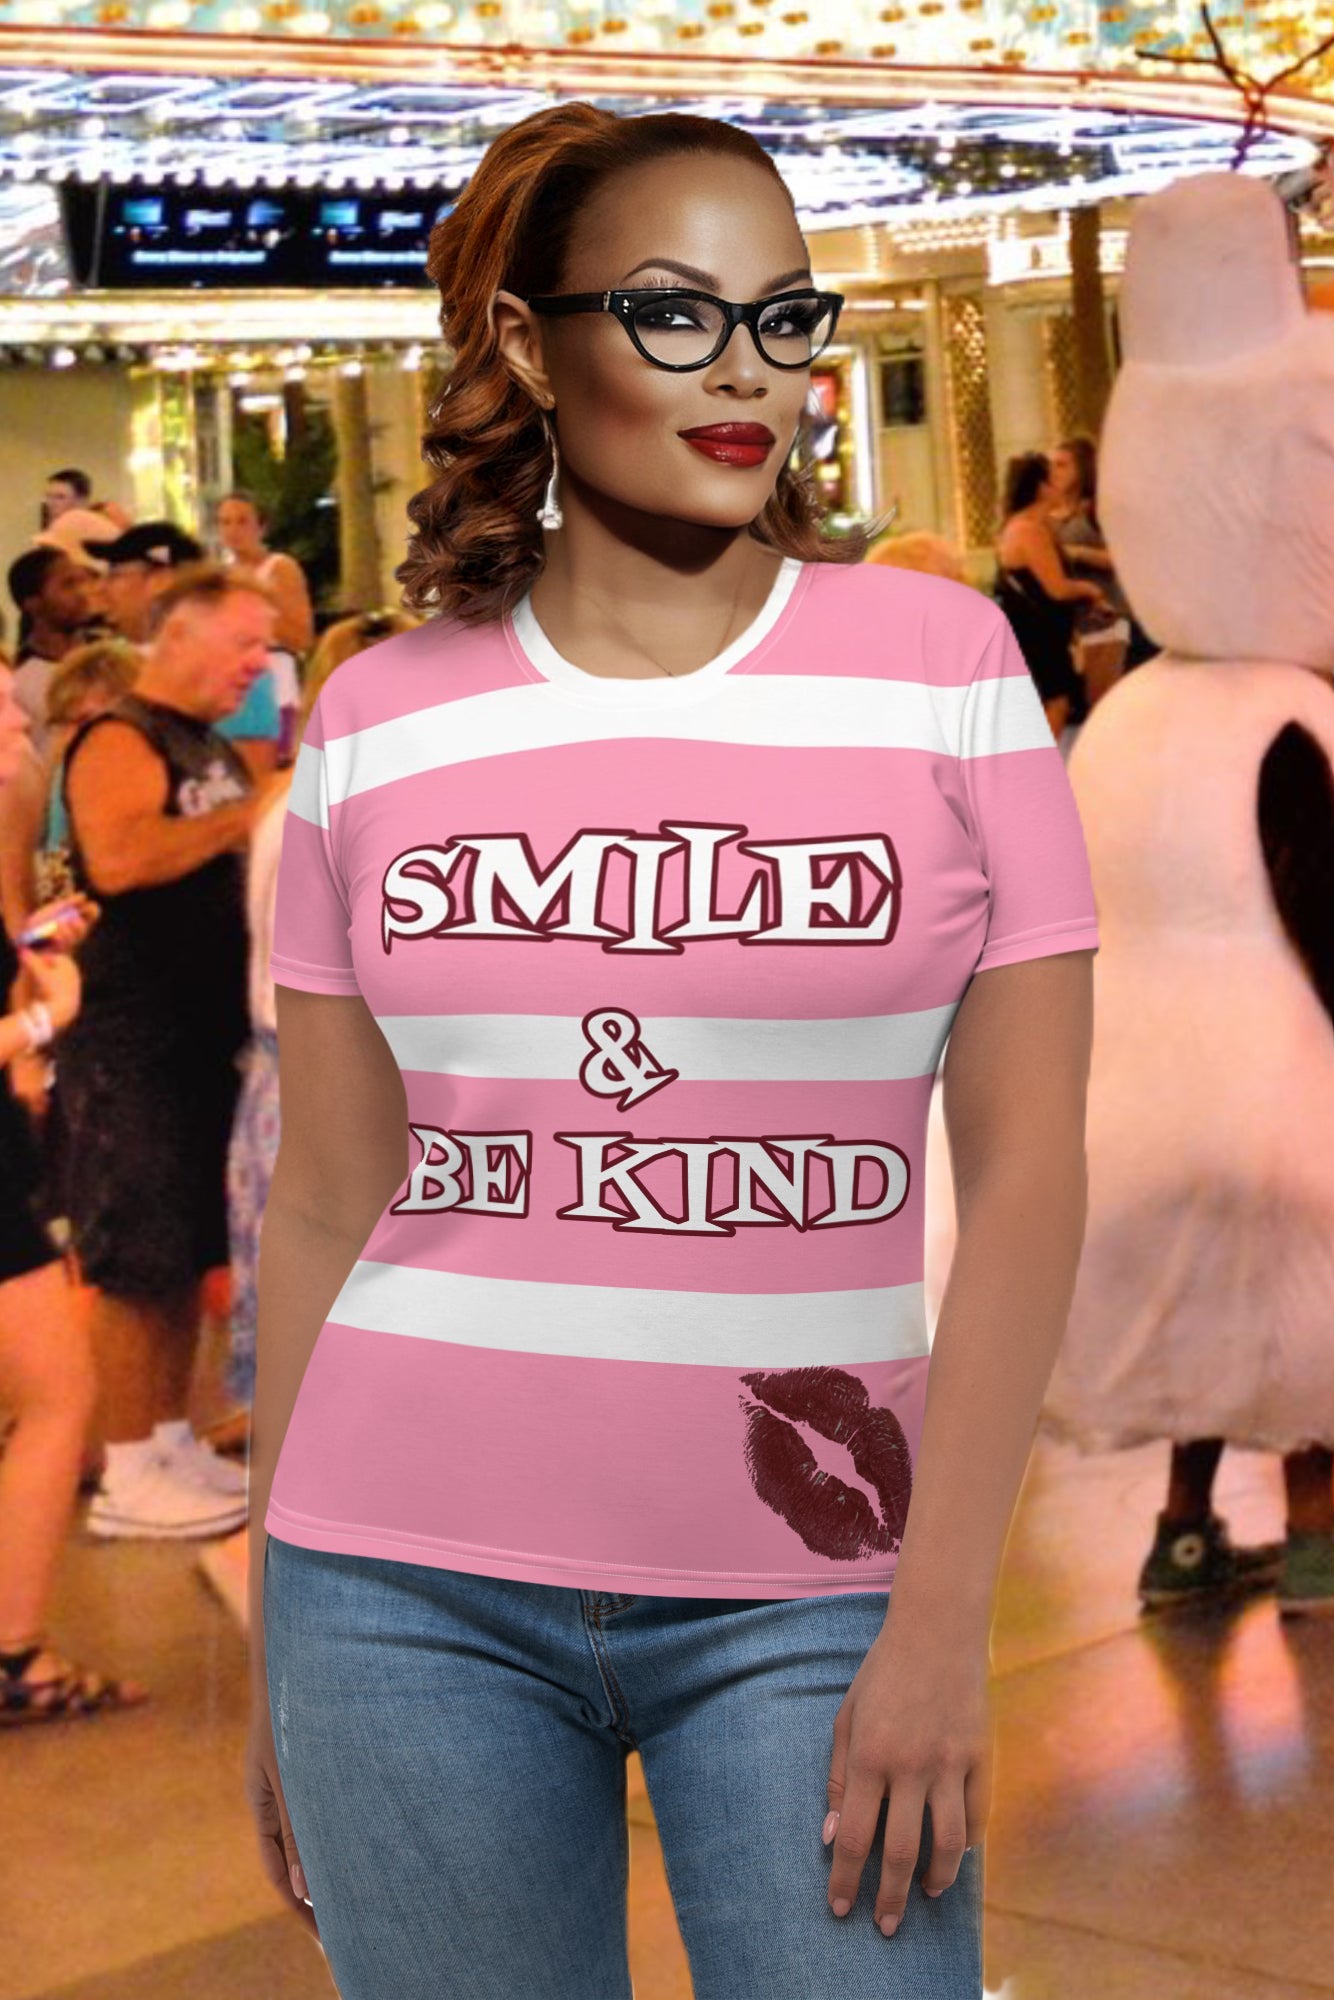 Smile & Be Kind Women's T-shirt - Pink